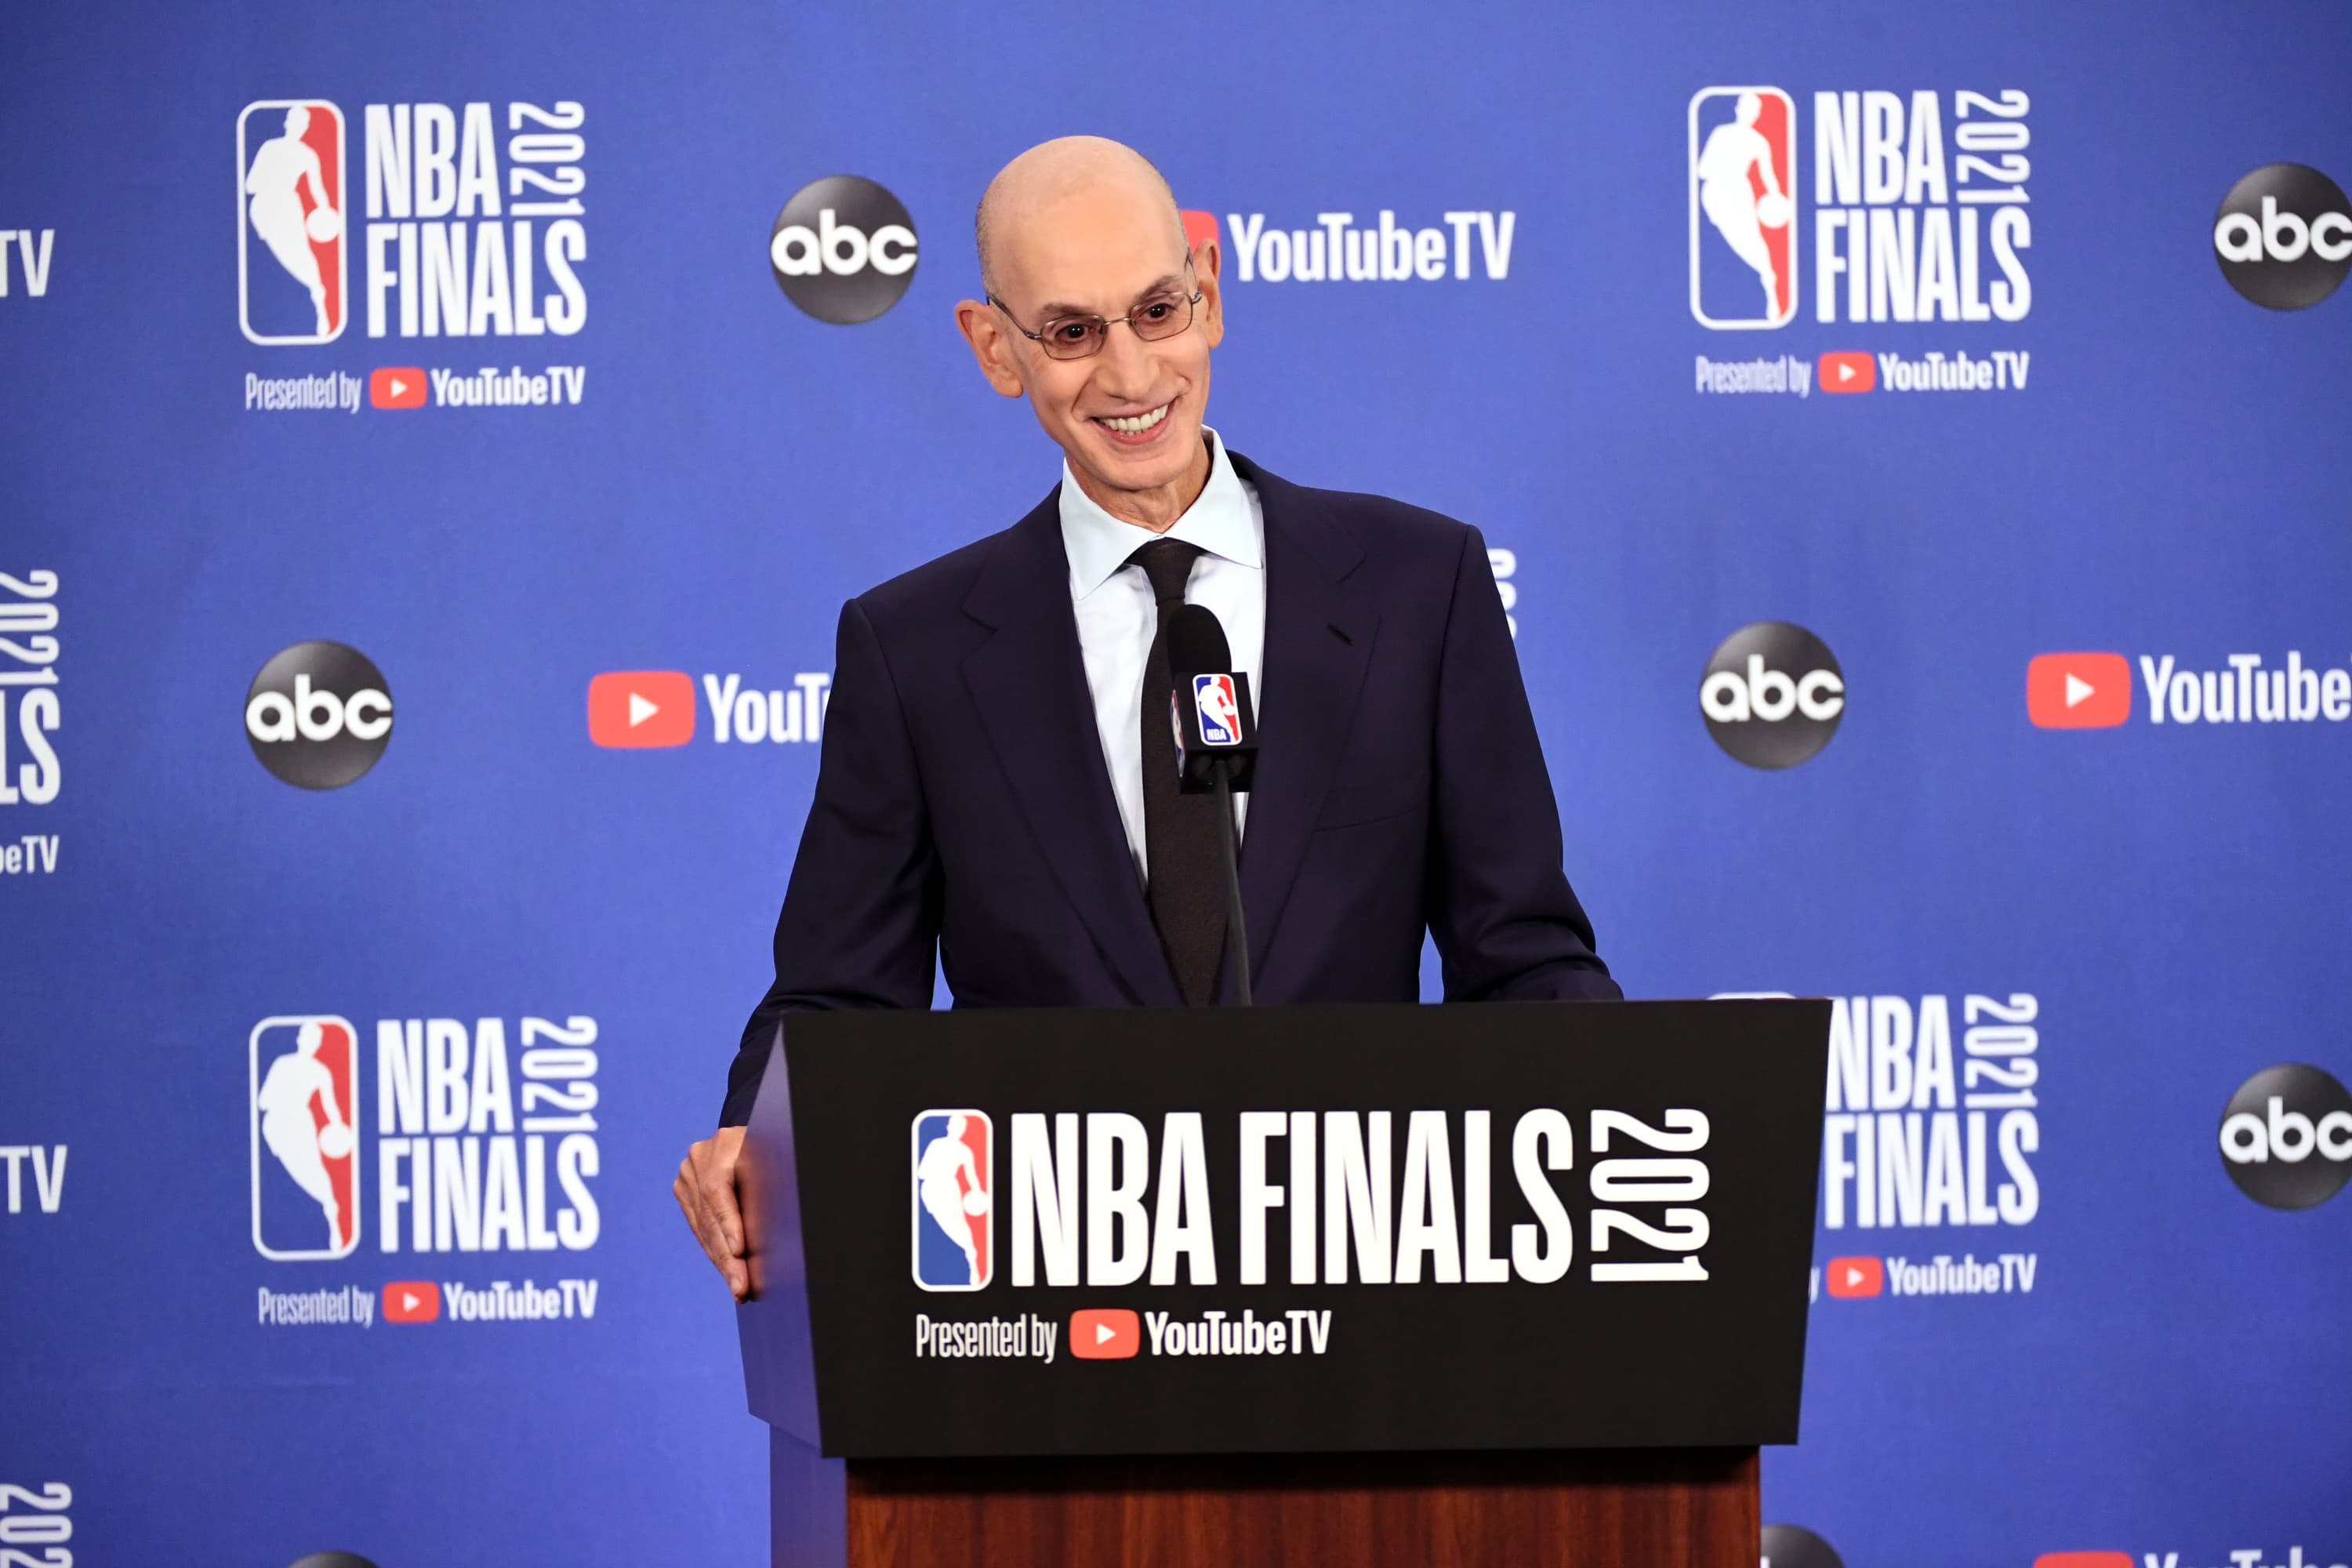 NBA wants to play the positive role and help defuse U.S.-China tensions